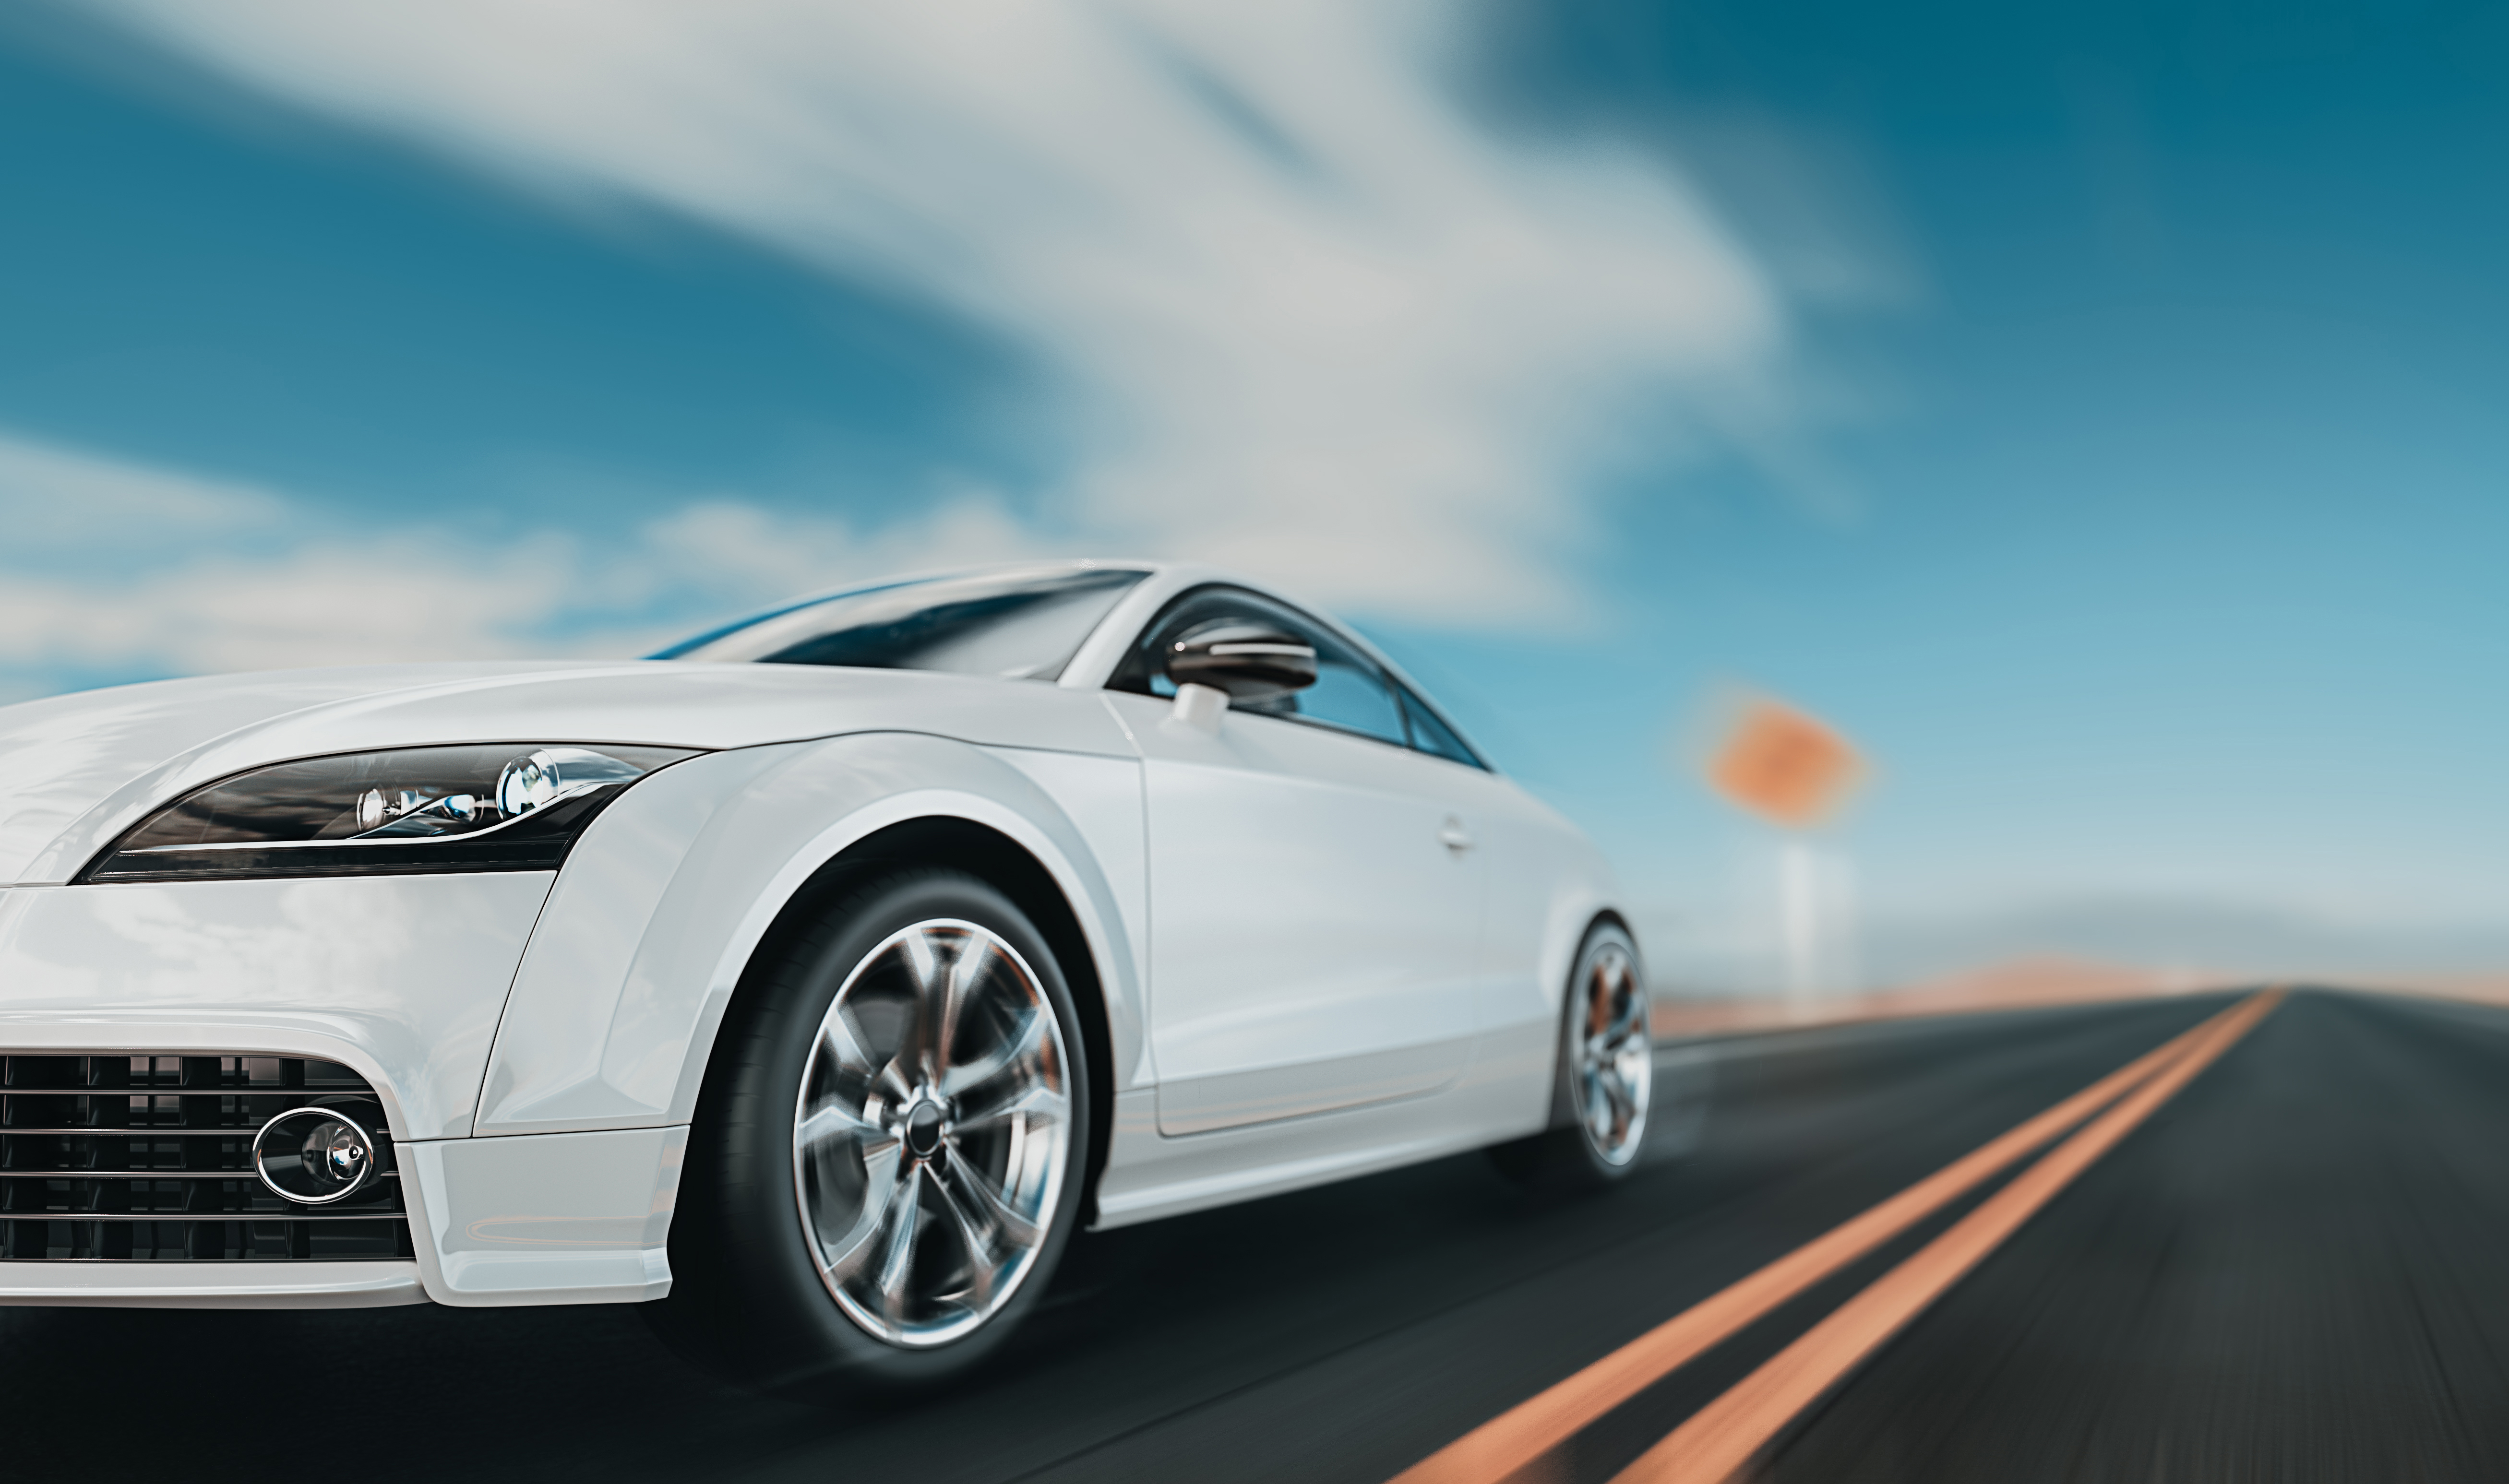 White front cars running on the road. 3d rendering and illustration.